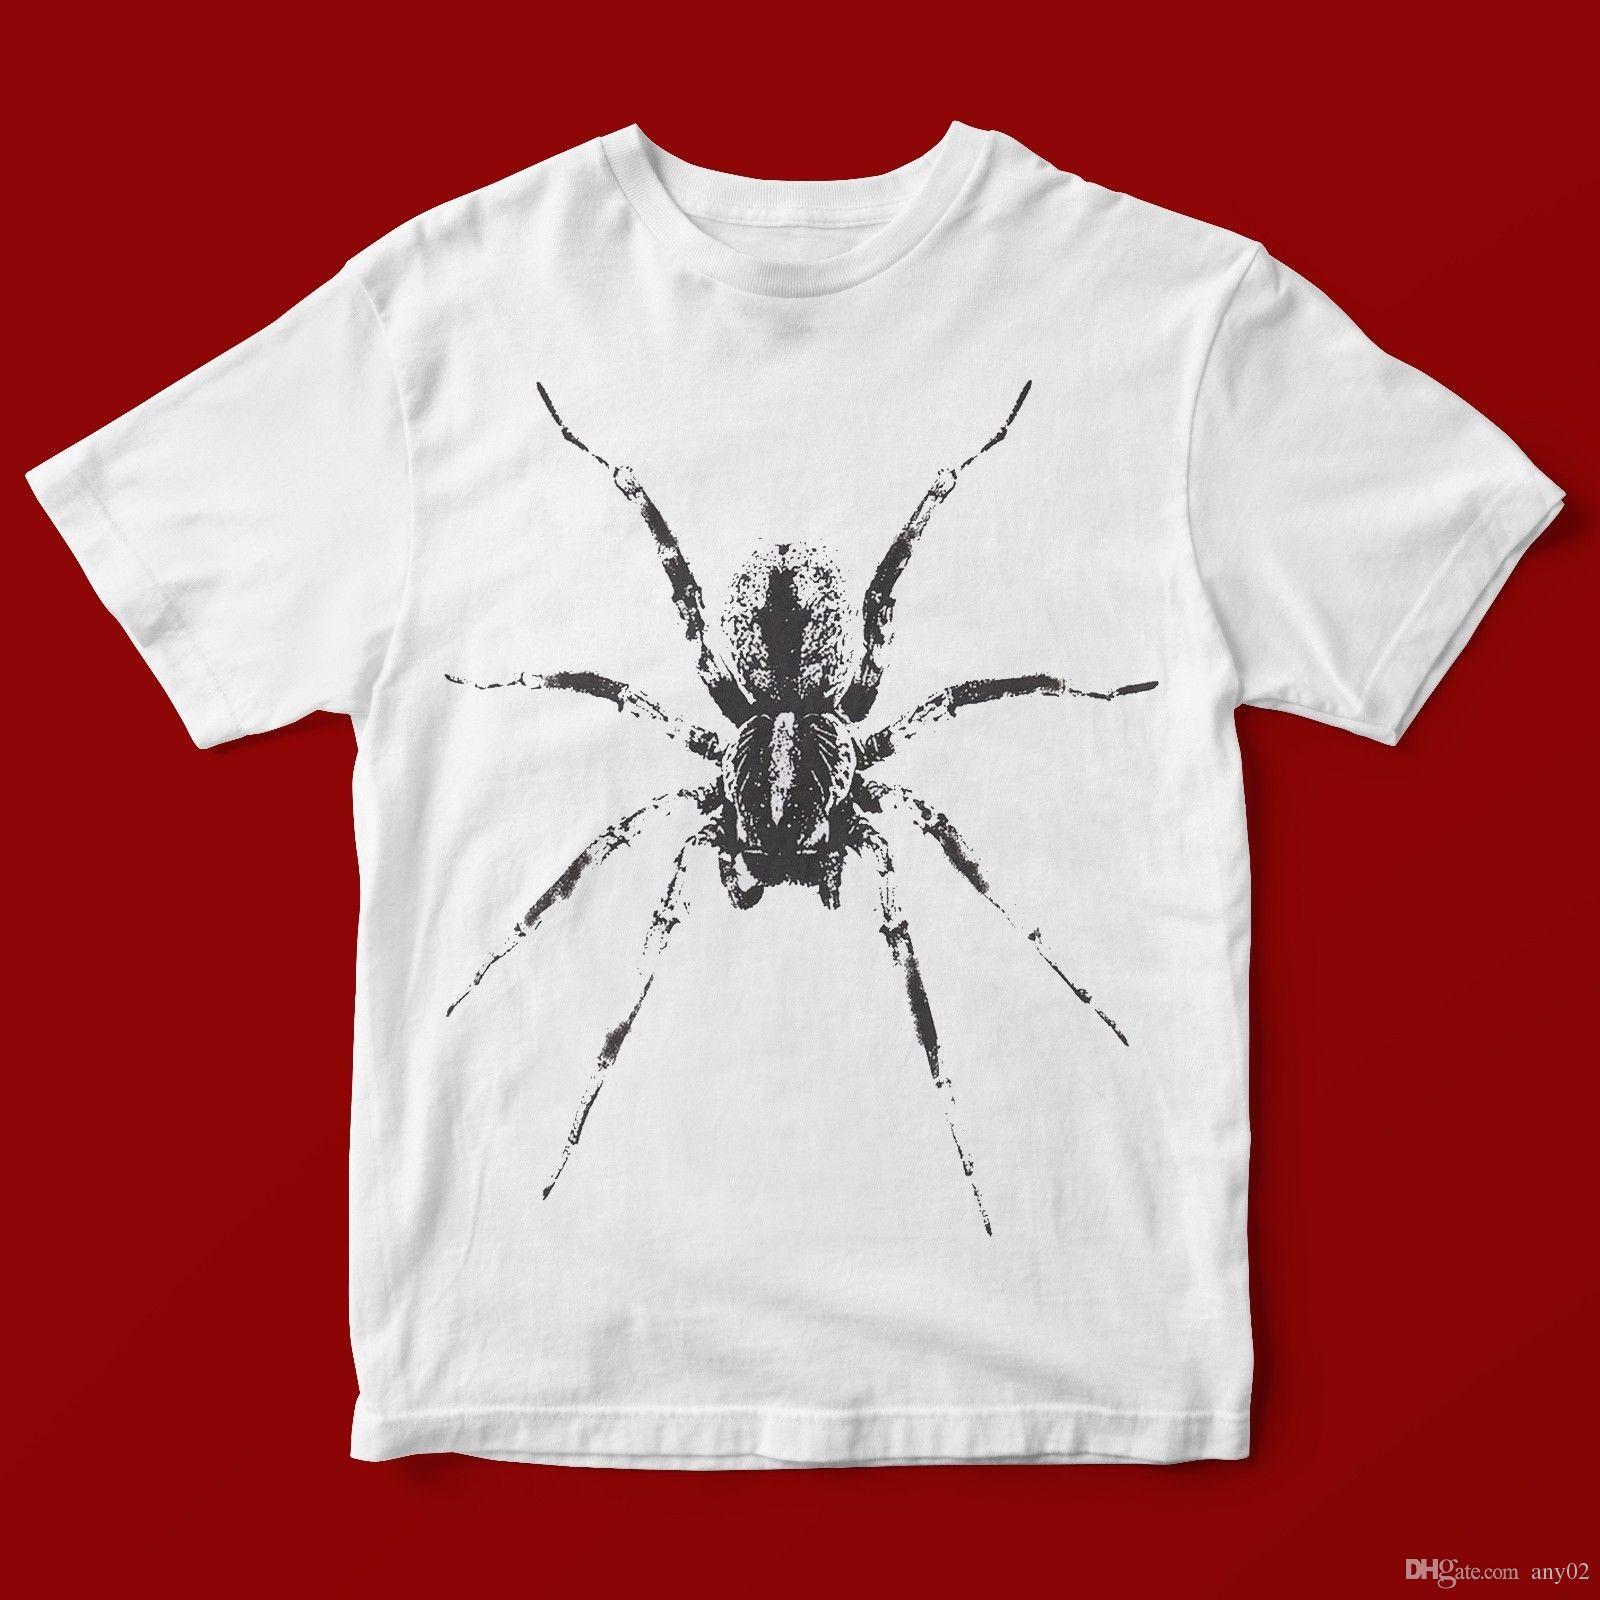 Cool Spider Logo - COOL SPIDER LOGO T SHIRT UNISEX 600 Tshirt Tshirts From Any02 ...